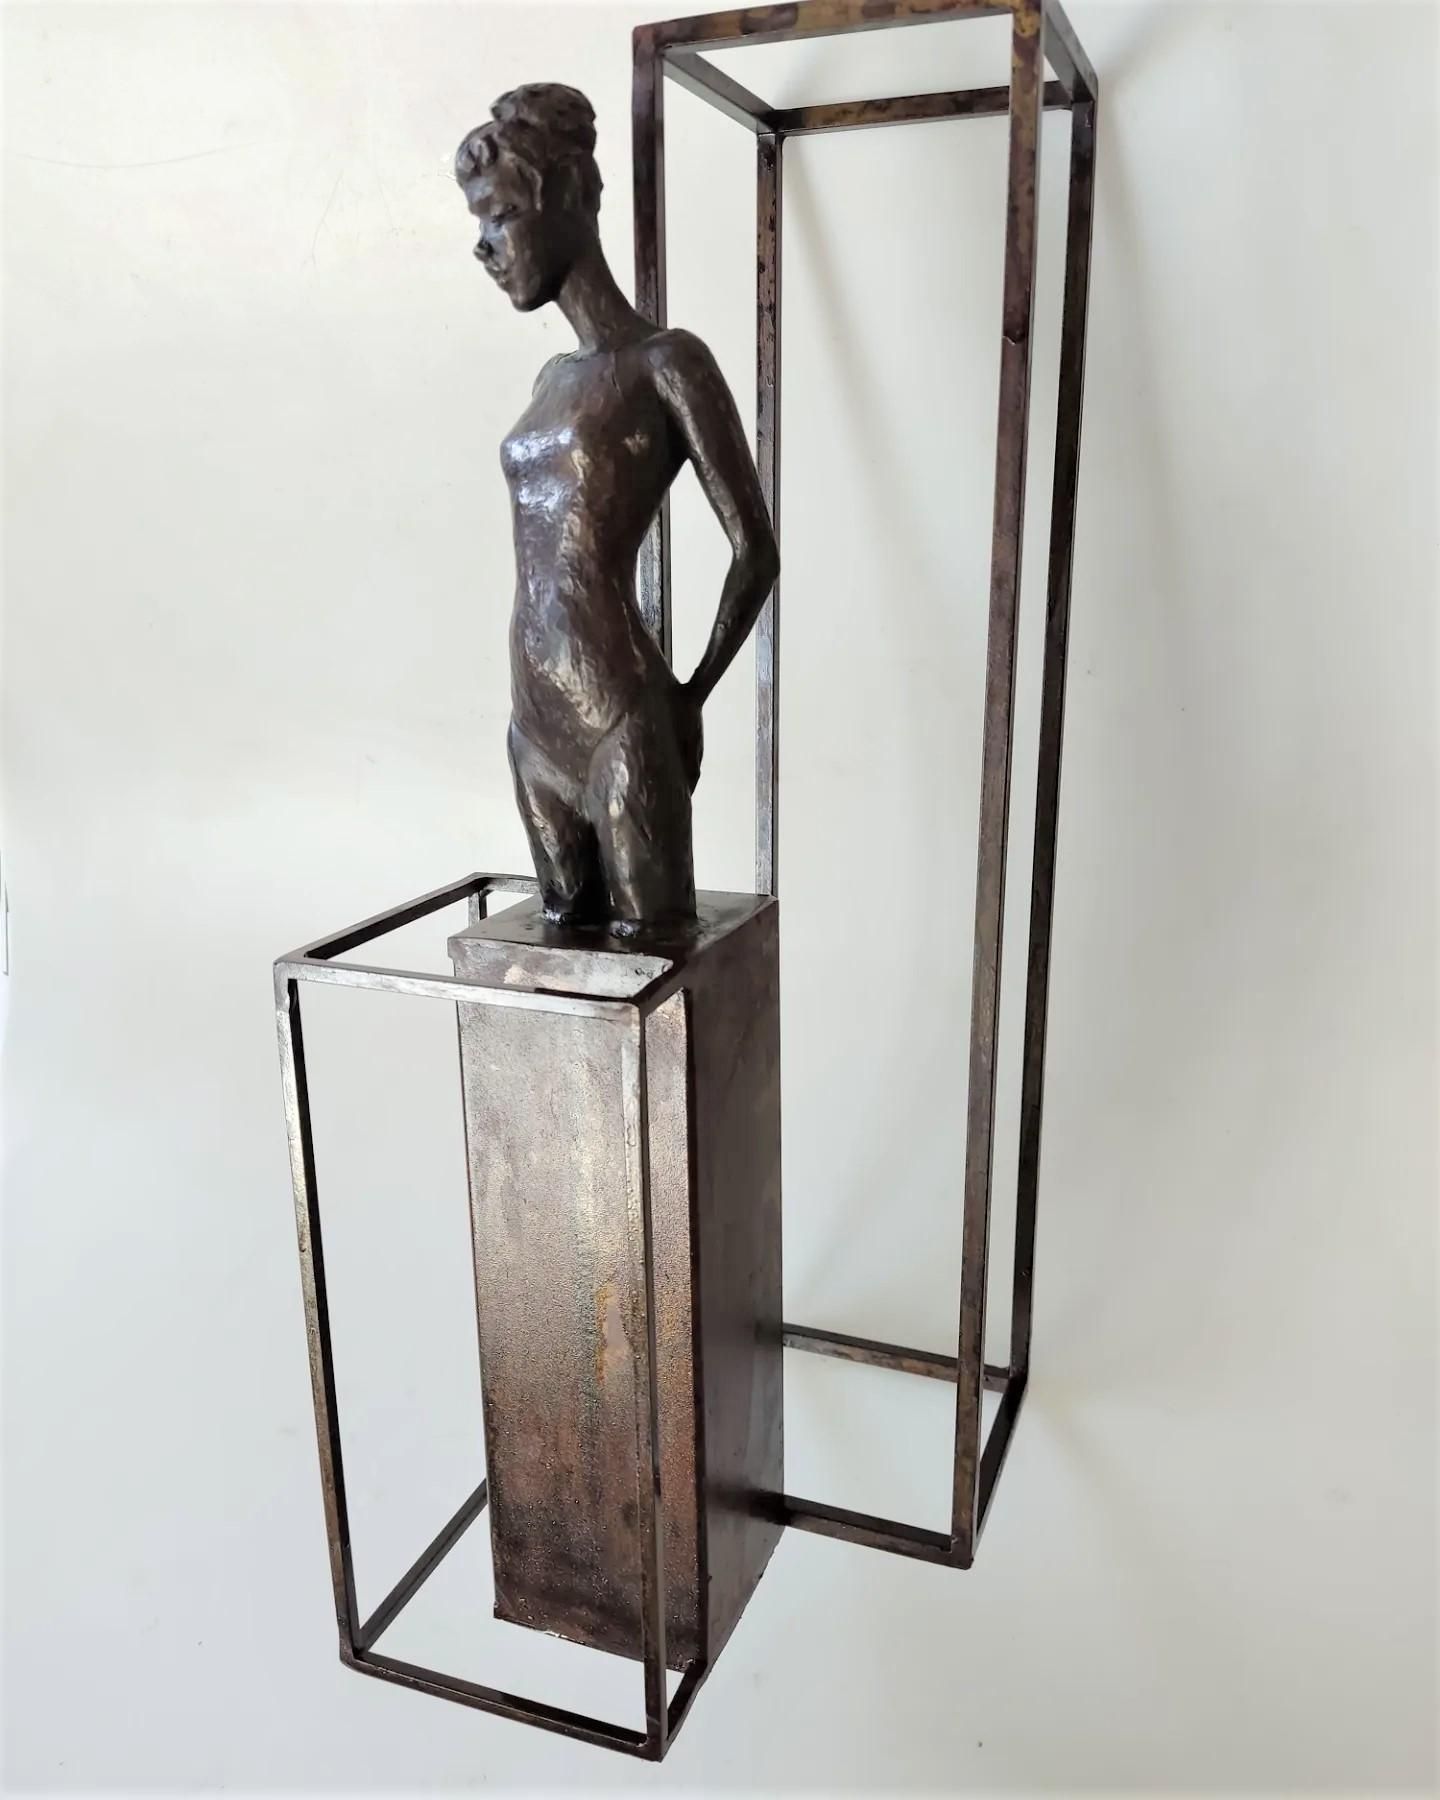 The Swimmer is a bronze table/wall sculpture, it is connected to a steel base. The edition size is 25. 

Joan’s latest sculpture series of female figures brings an out-of-the-box approach to sculpture creation. The small vivid women figures linked